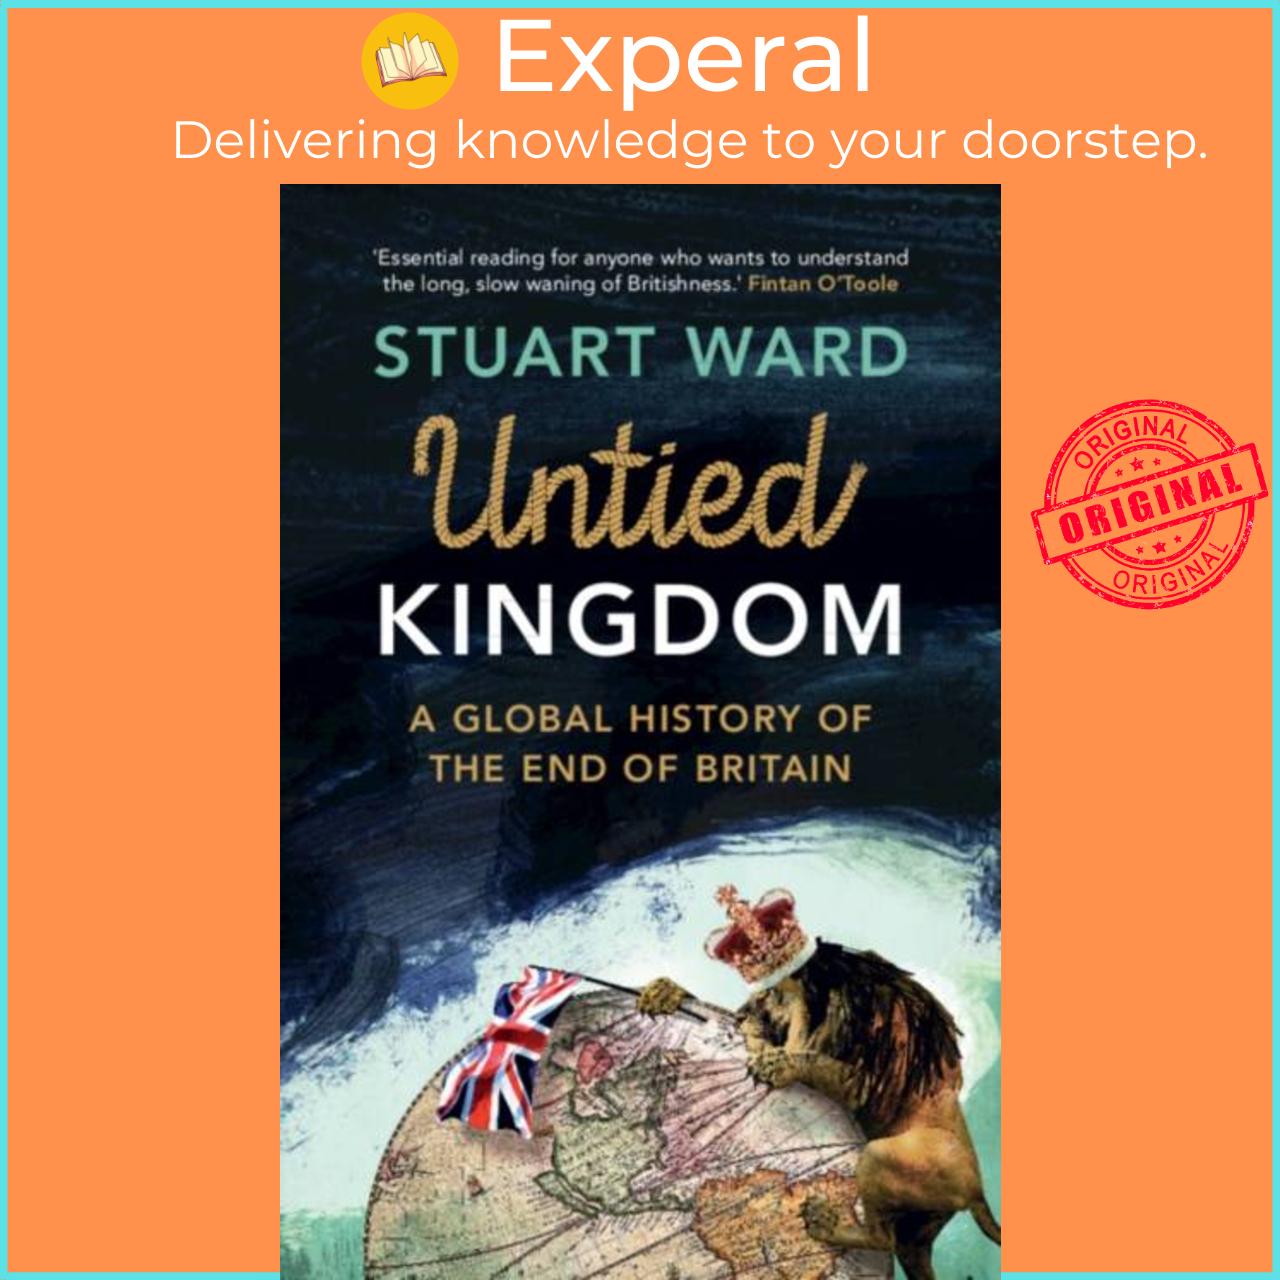 Hình ảnh Sách - Untied Kingdom - A Global History of the End of Britain by Stuart Ward (UK edition, hardcover)